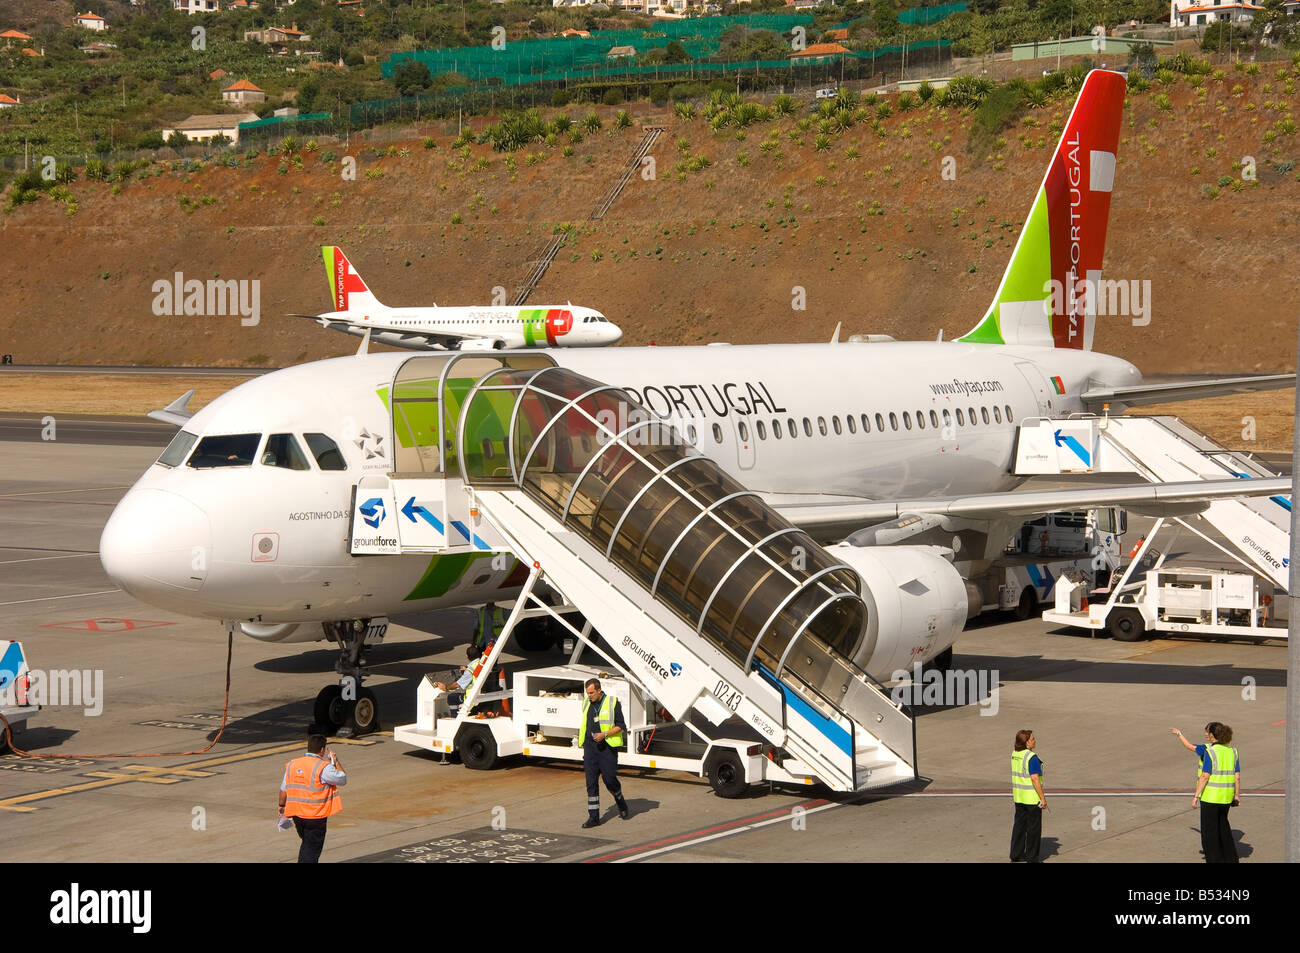 TAP Portugal aircraft at Funchal airport Madeira Portugal EU Europe Stock Photo